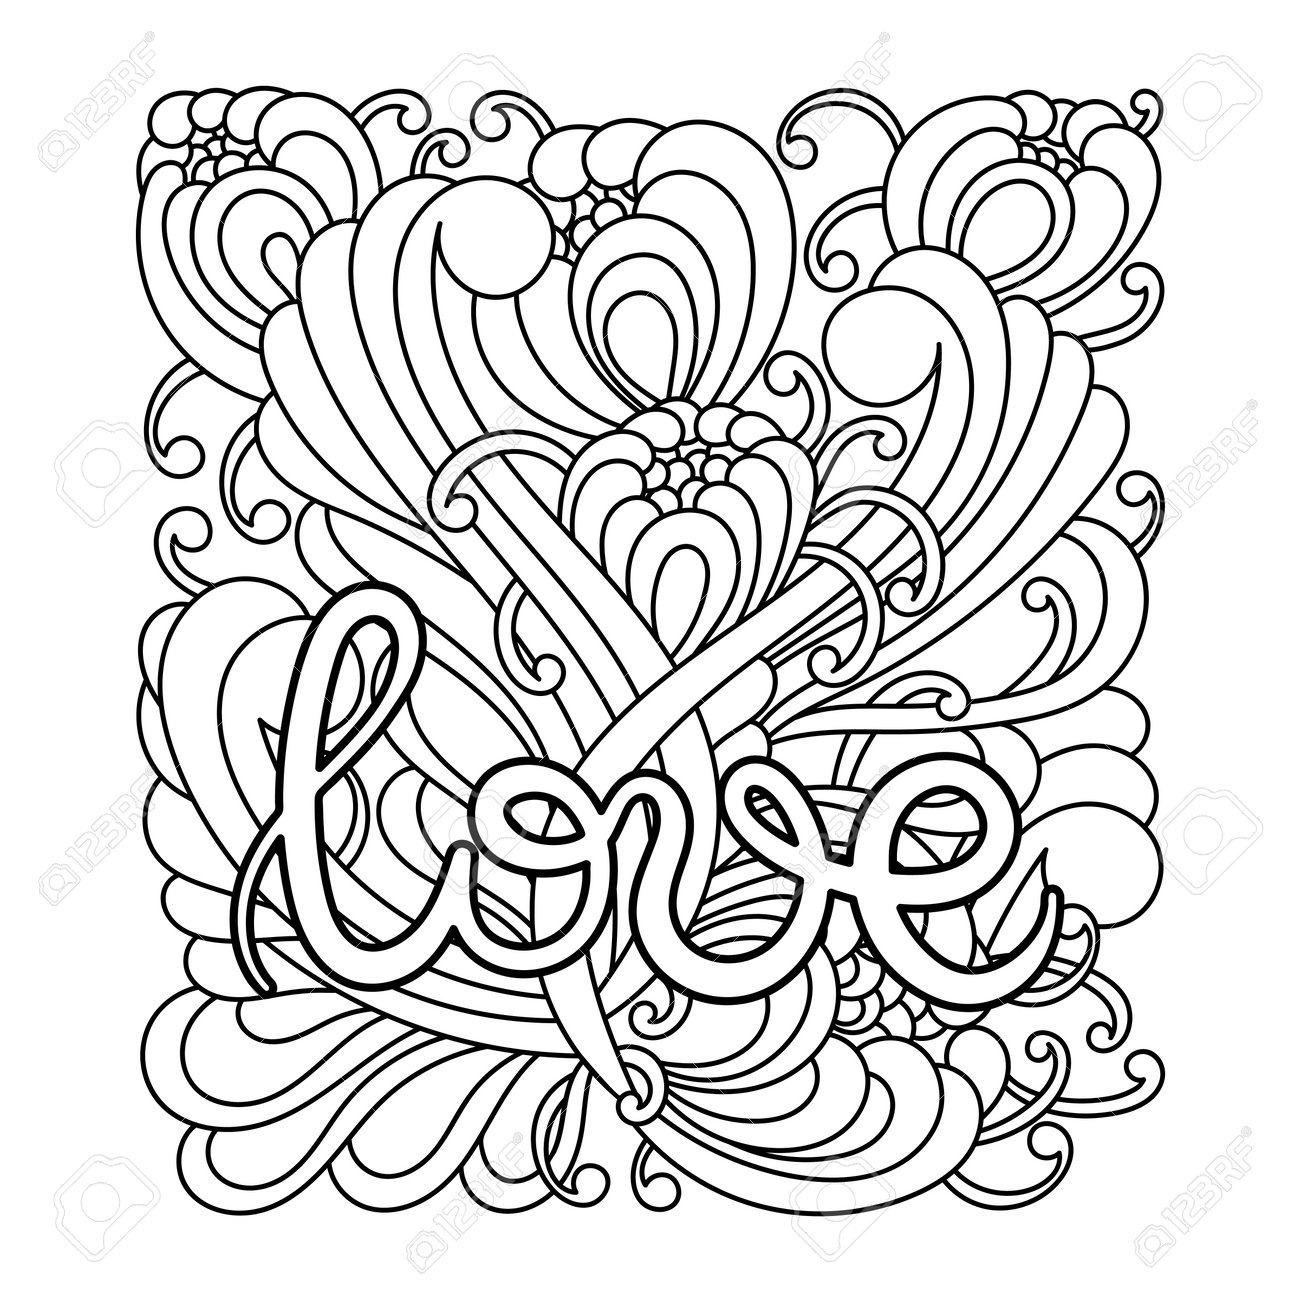 Love word coloring page valentines day coloring book for children and adults vector illustration royalty free svg cliparts vectors and stock illustration image